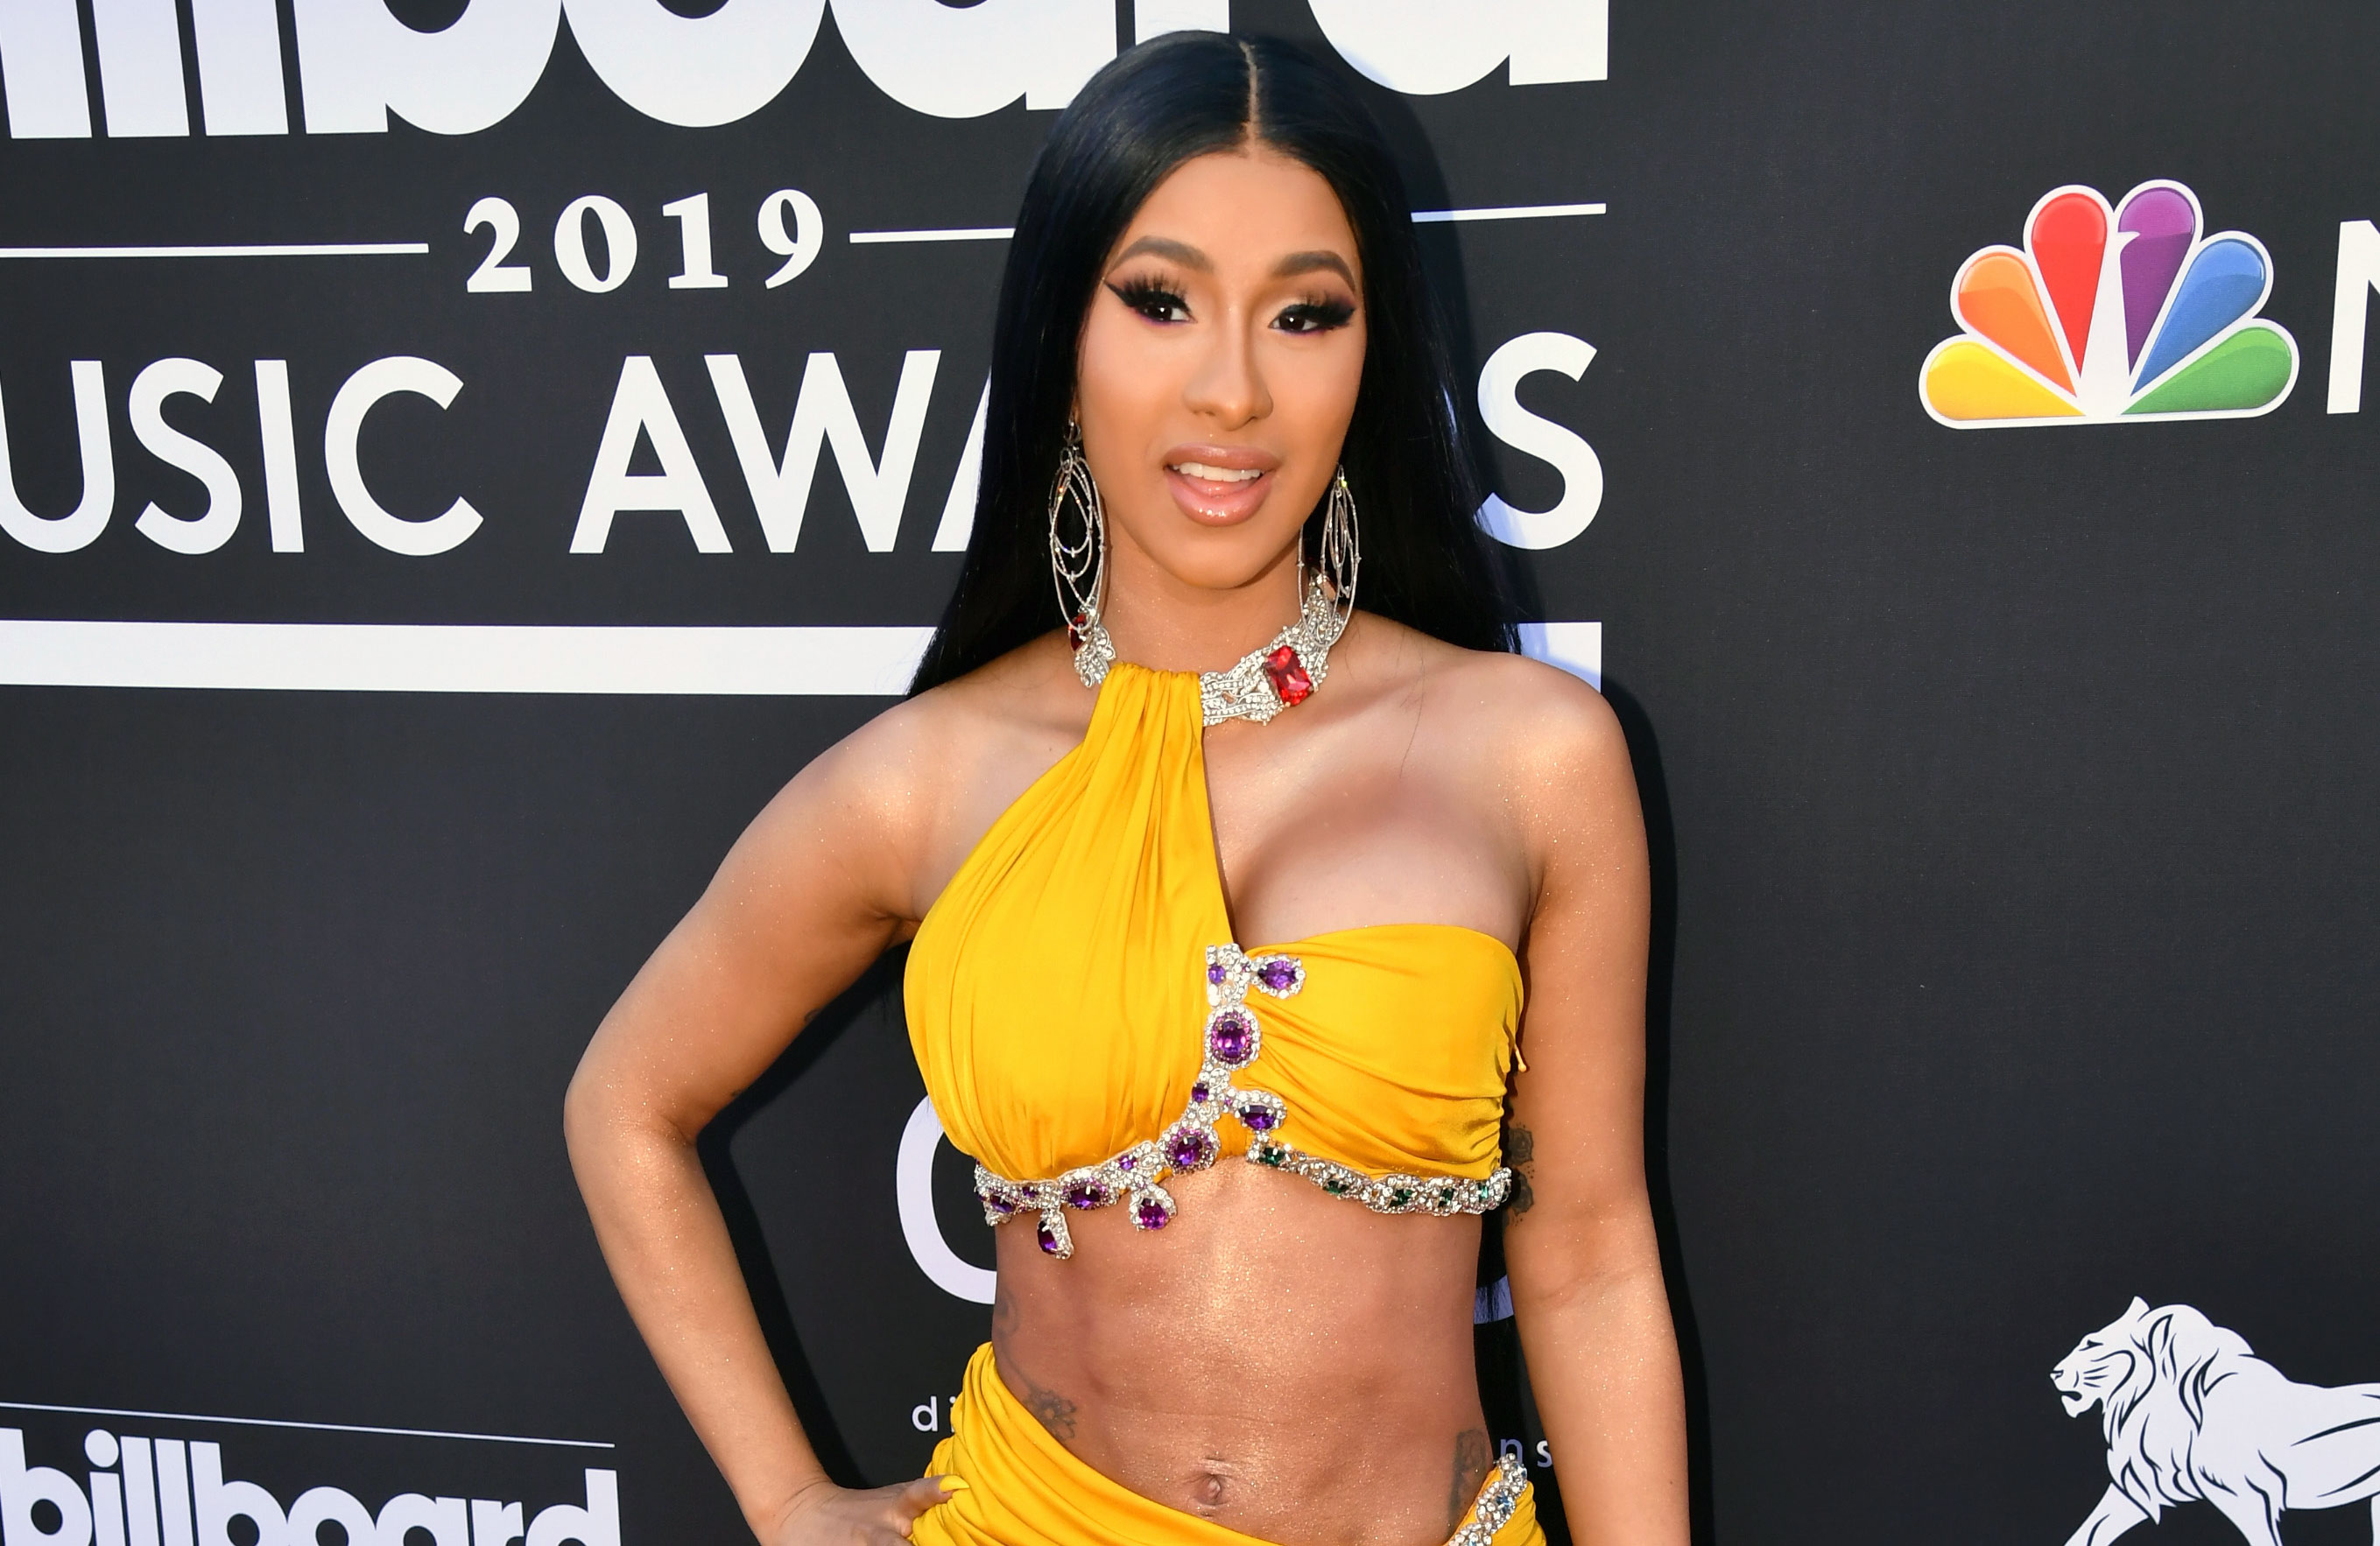 Billboard Music Awards 2019 Cardi B Goes Nude in Video Post-Show pic